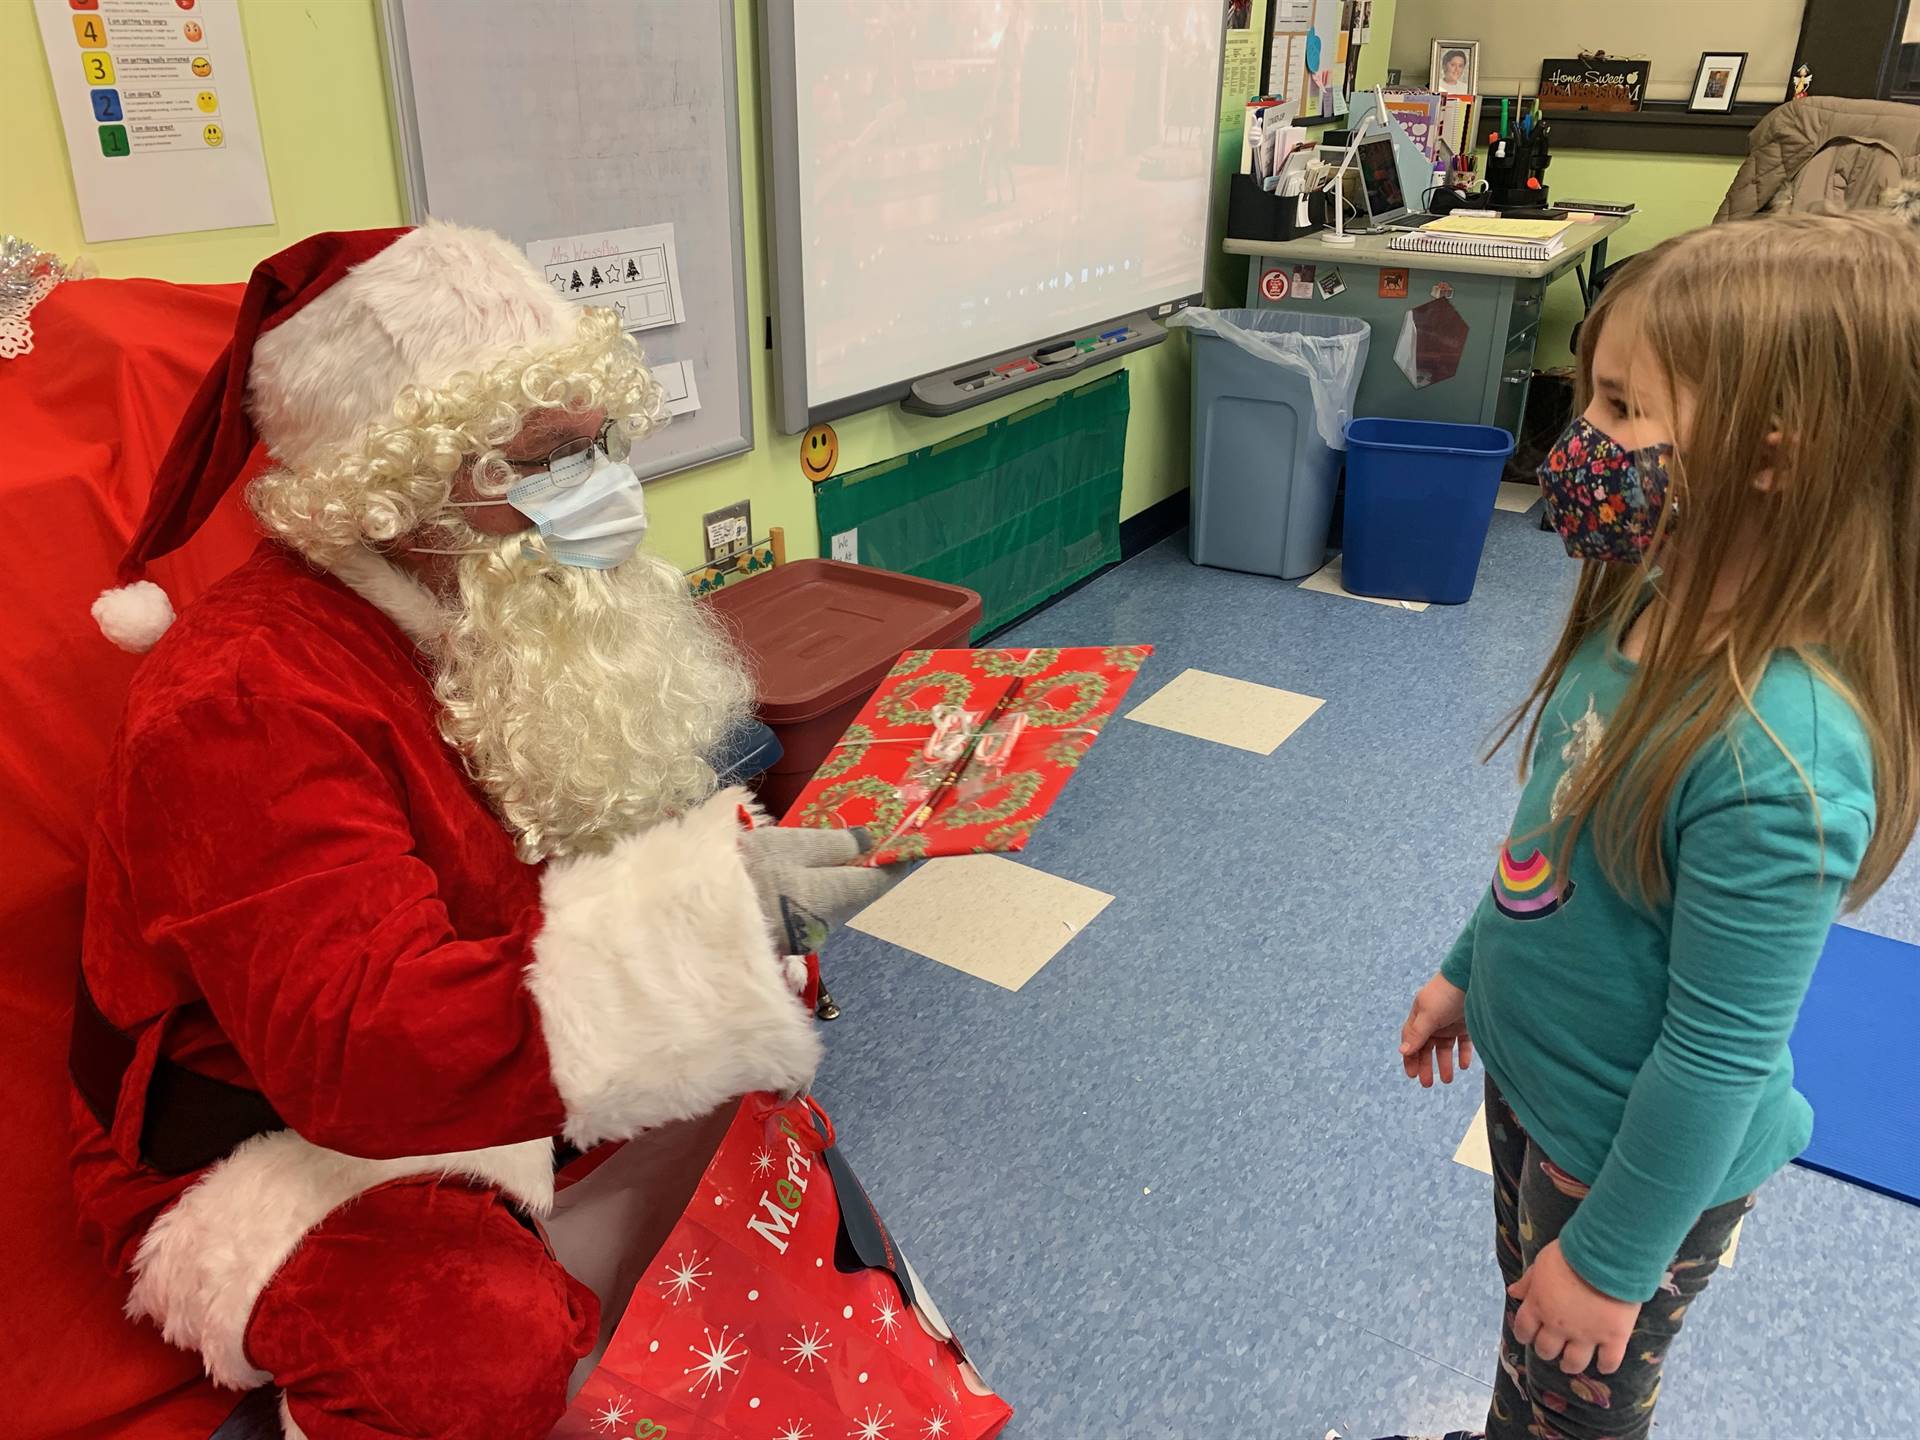 Santa asks a student if she is good.